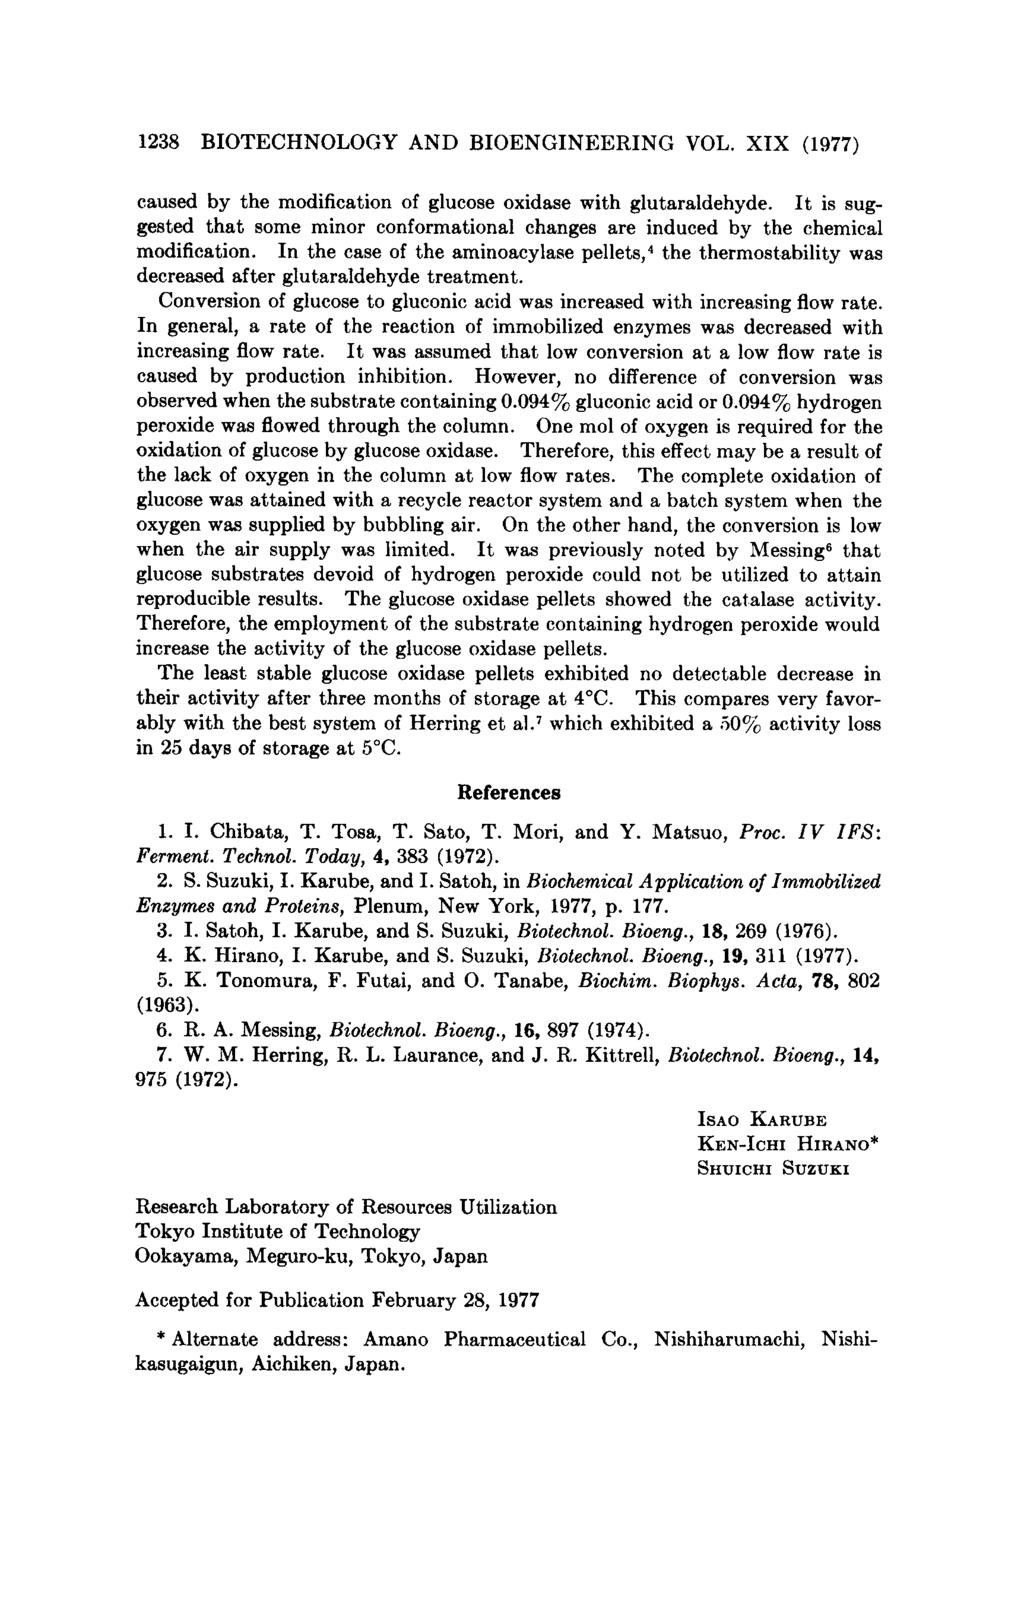 1238 BIOTECHNOLOGY AND BIOENGINEERING VOL. XIX (1977) caused by the modification of glucose oxidase with glutaraldehyde.